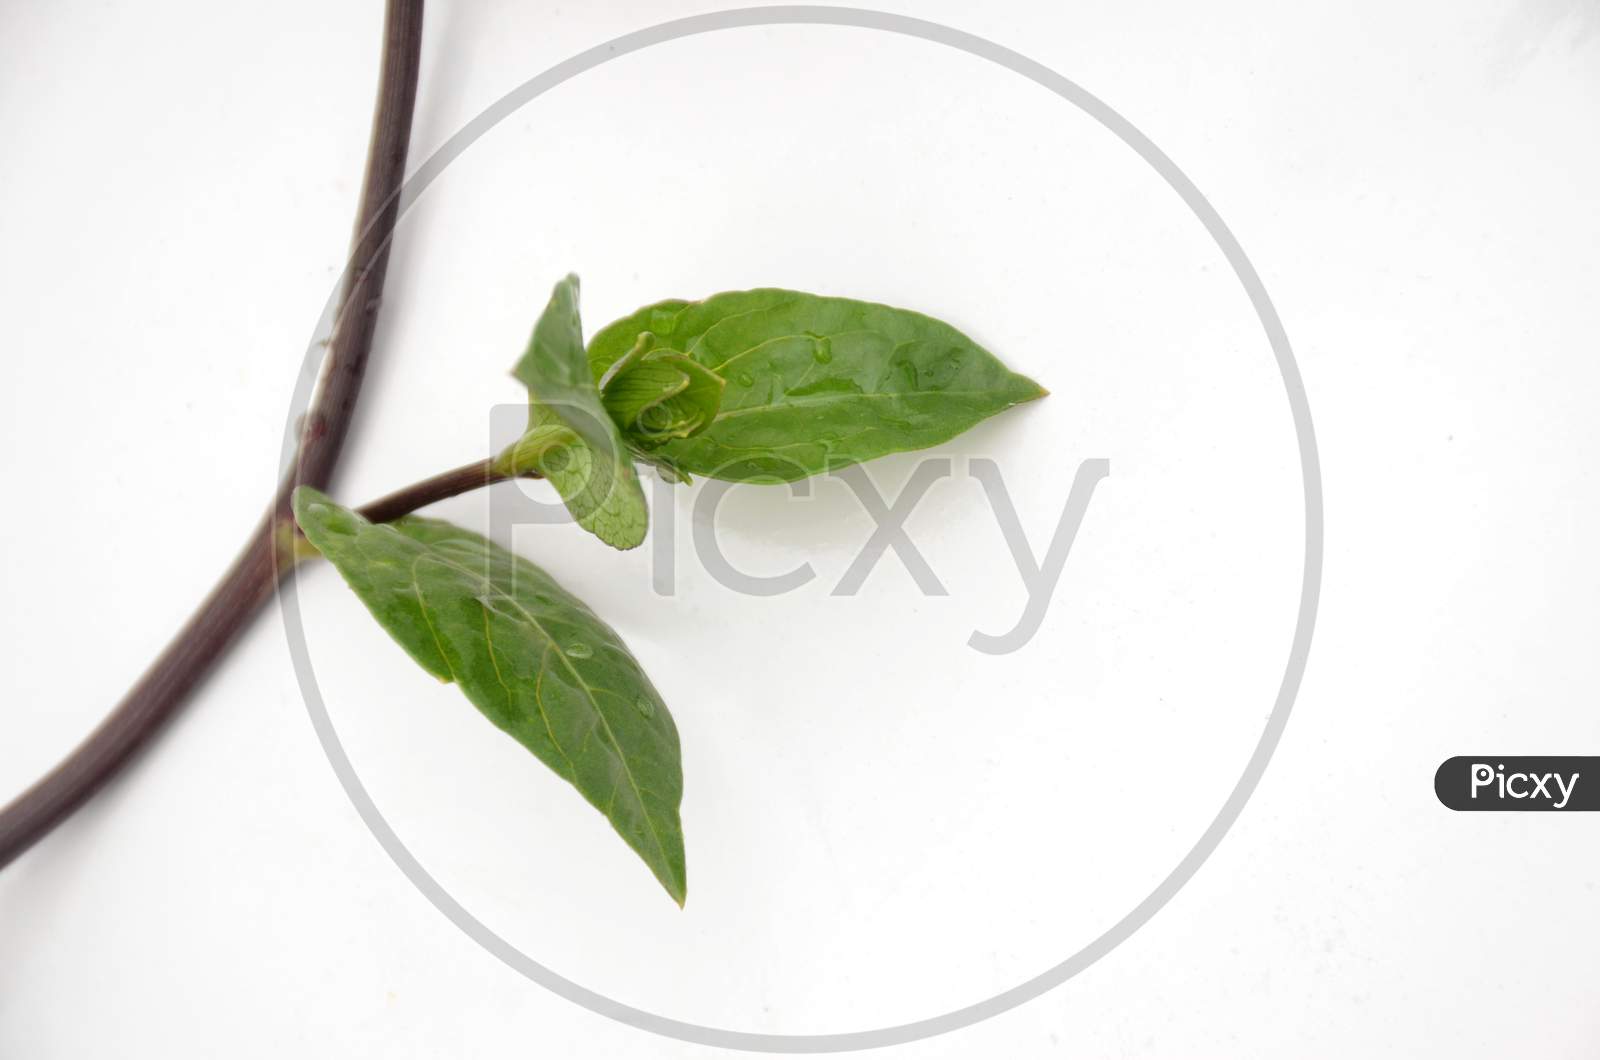 The Beautiful Leaf And Branch Isolated On White Background.